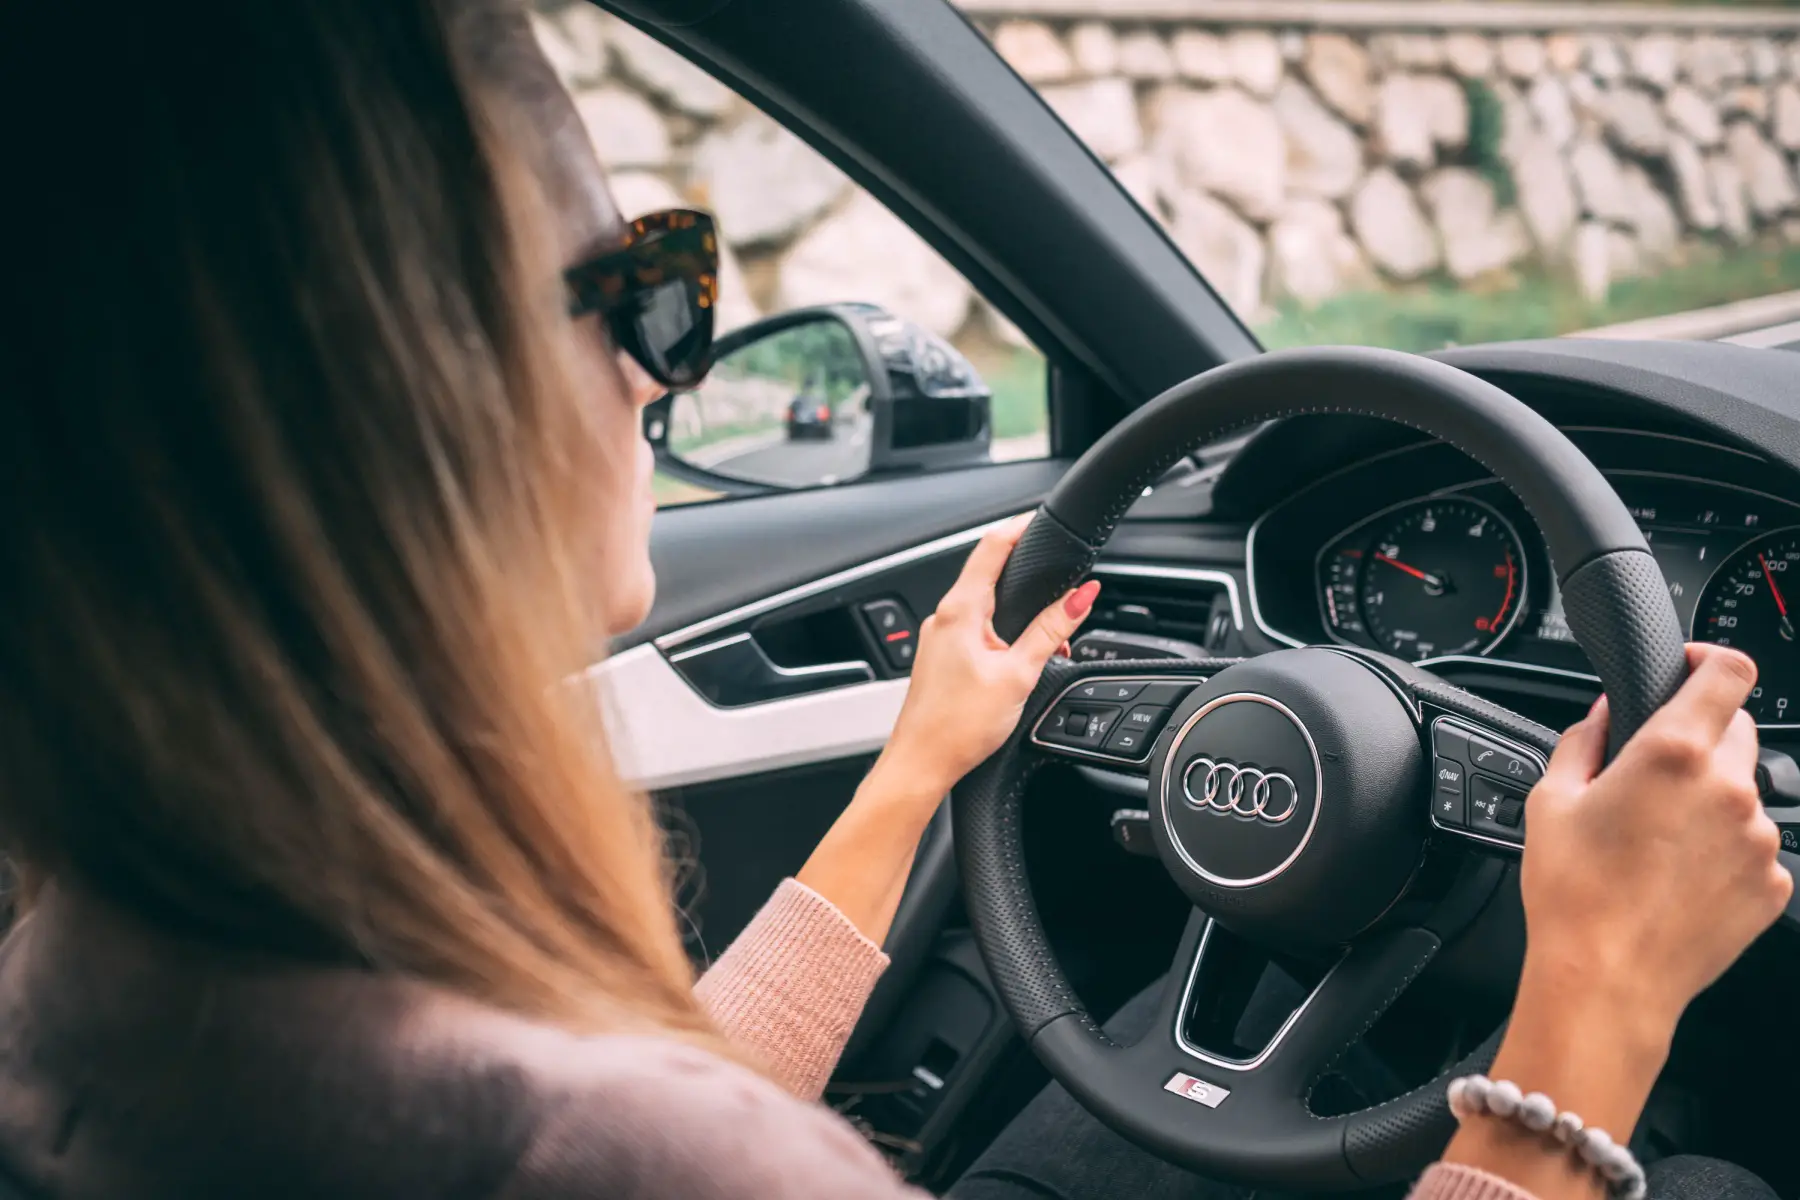 a stylish woman wearing shades and test-driving an Audi car